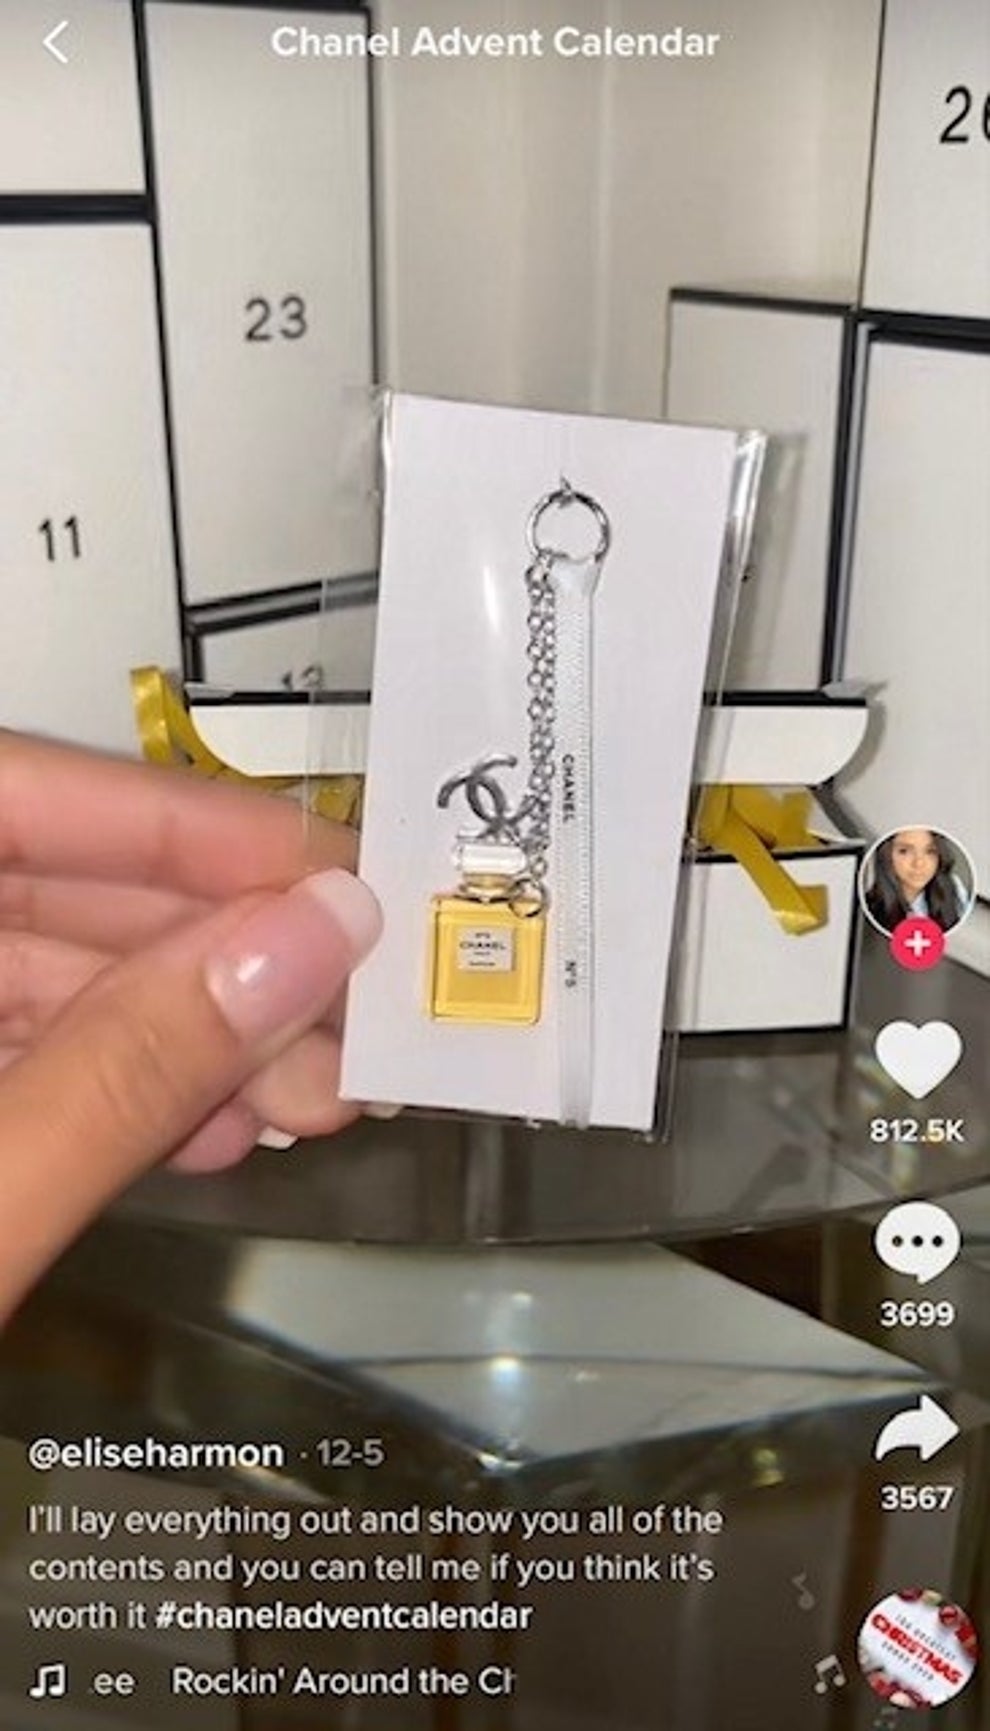 Diet Prada ™ on Instagram: TikTok is having a field day over a $825  @chanelofficial advent calendar stuffed with low value products. In a  series of unboxing videos on the social media